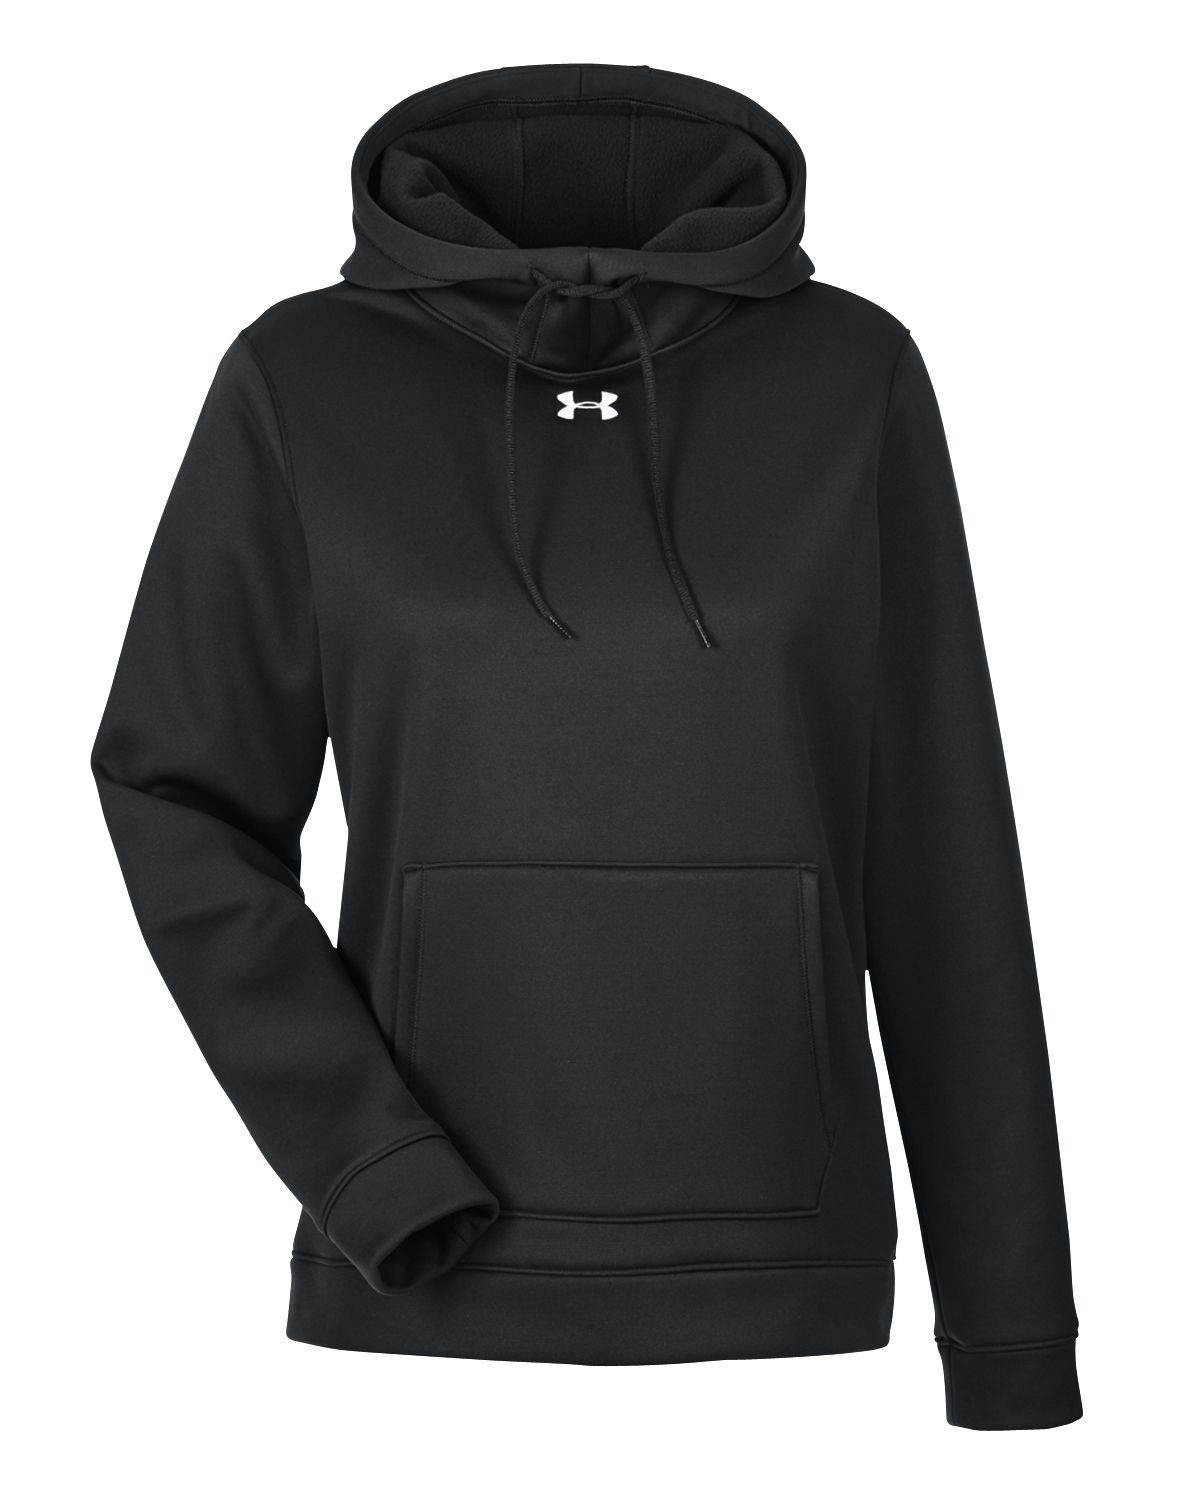 Under Armour Youth Solid Antler STORM Hoodie Brown 1241052-241 